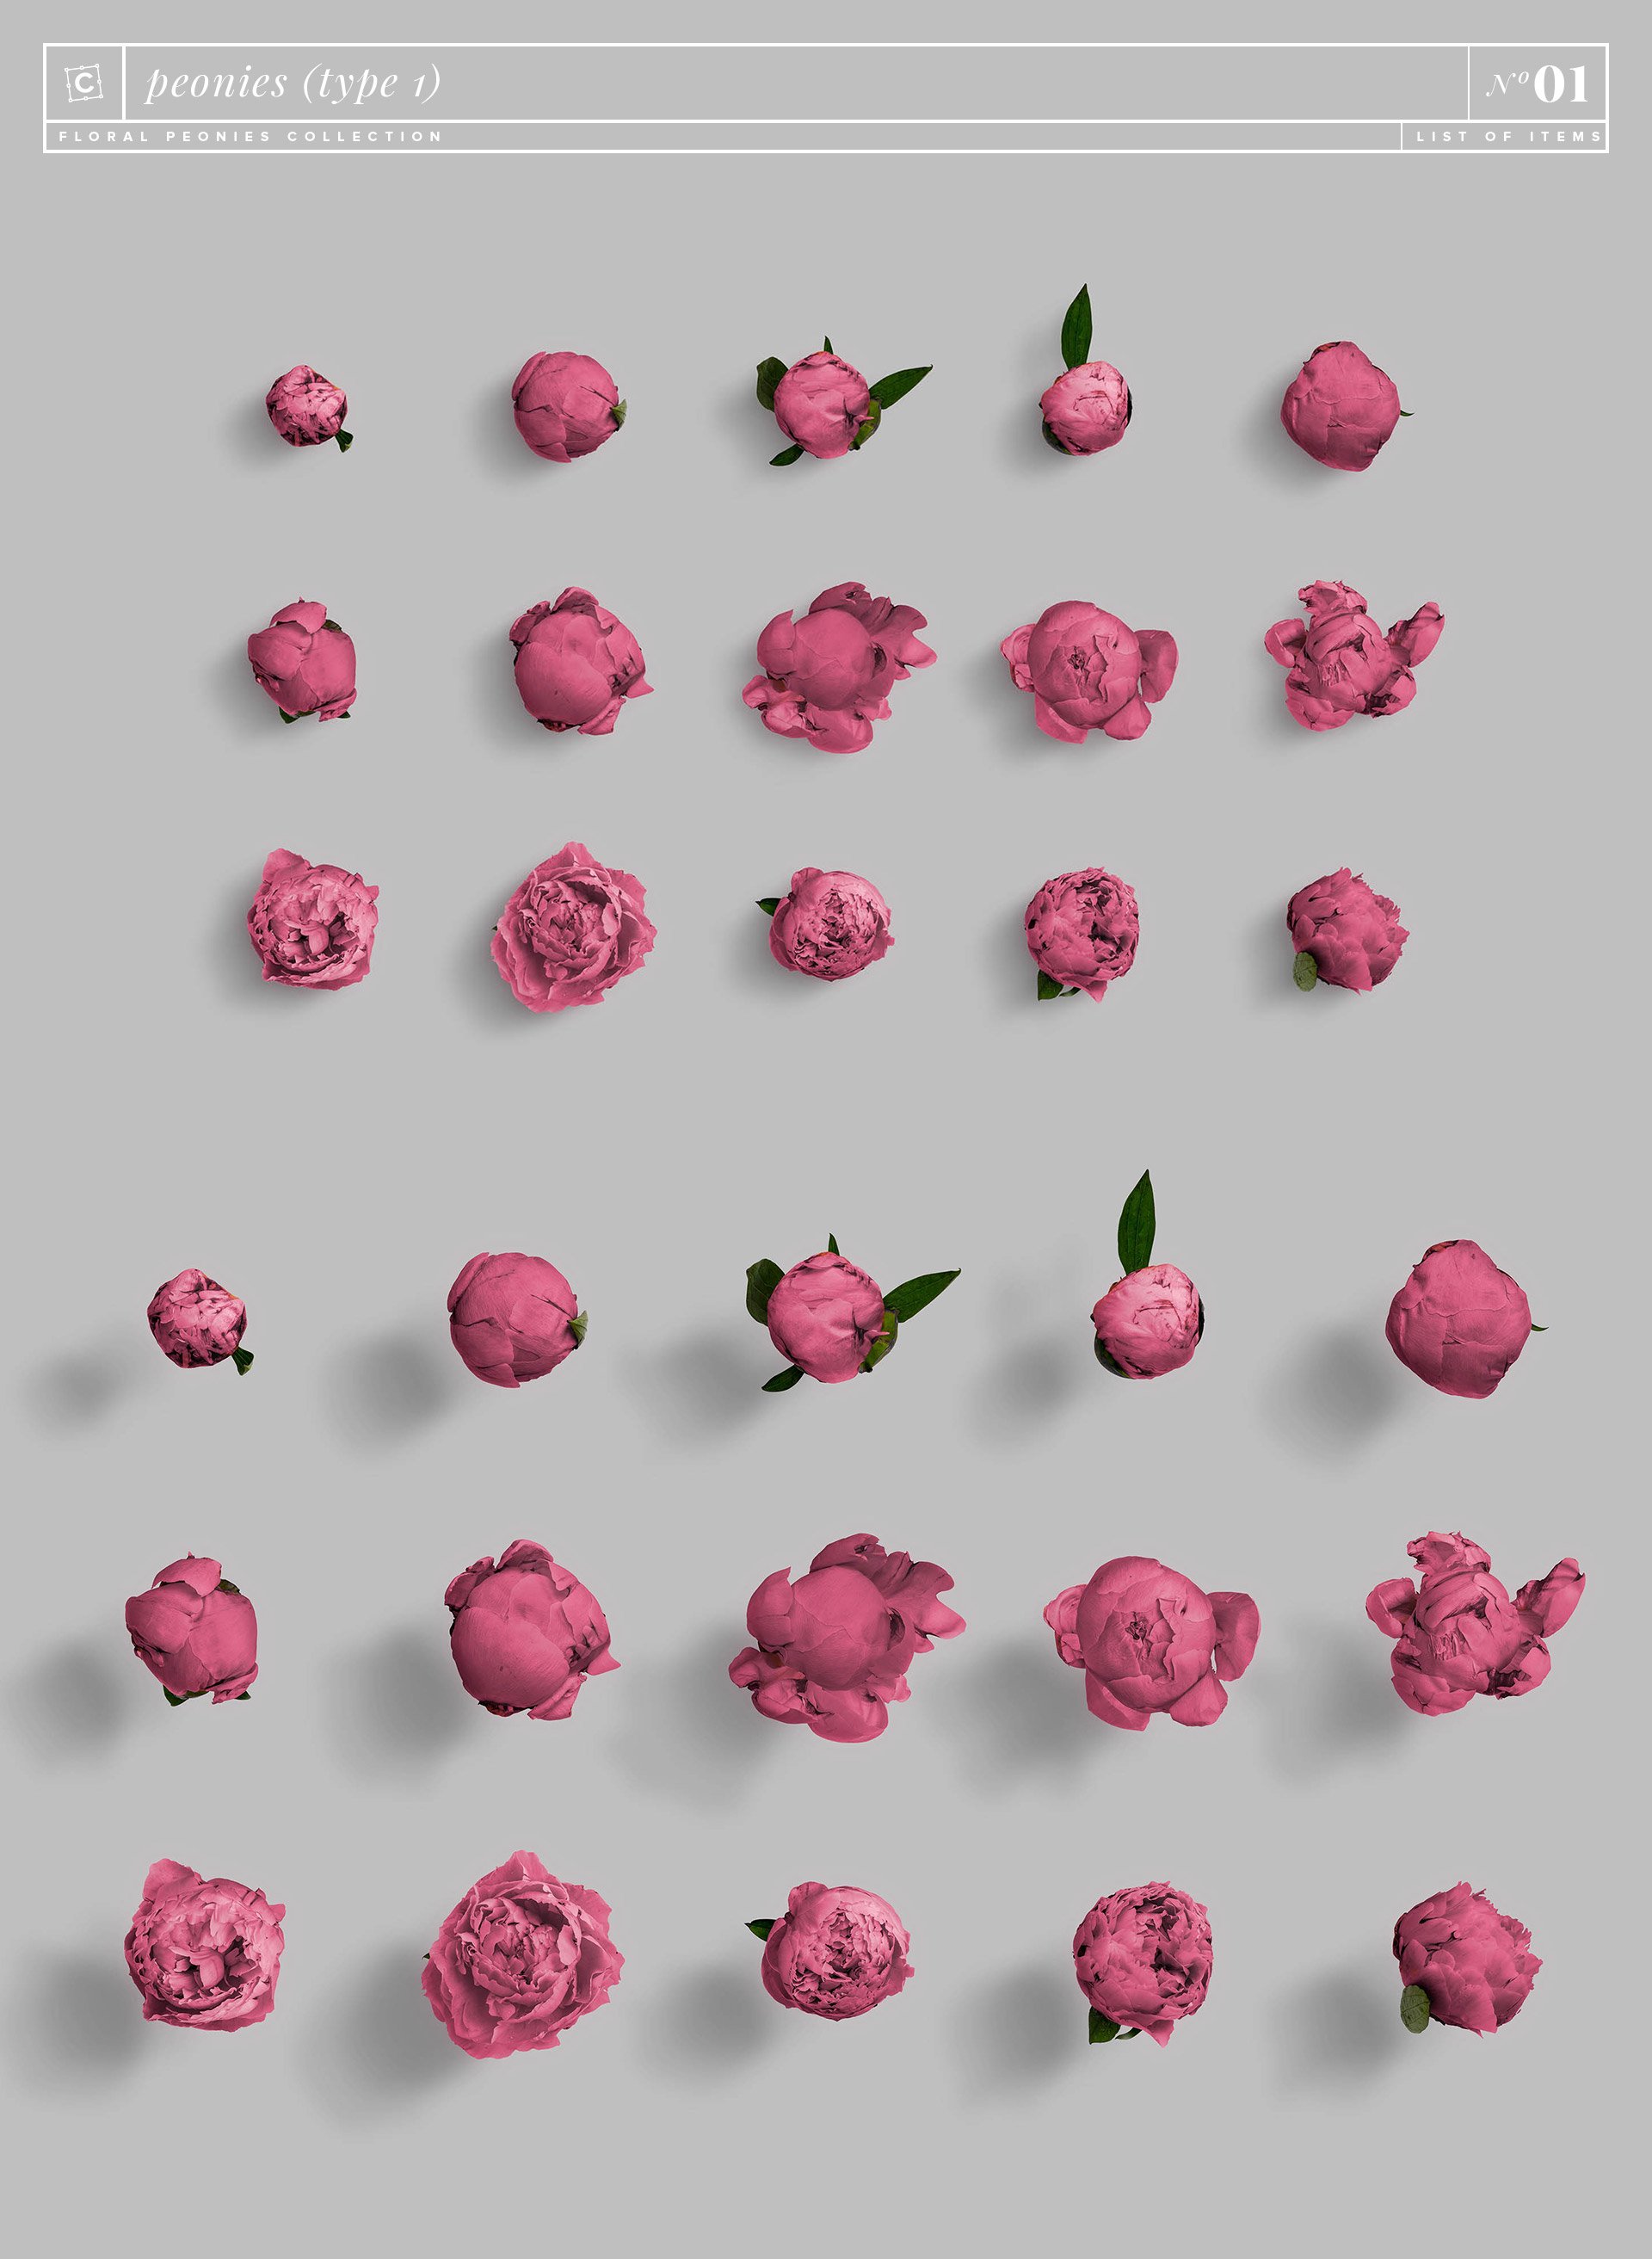 peonies 1 floral peonies collection customscene 981